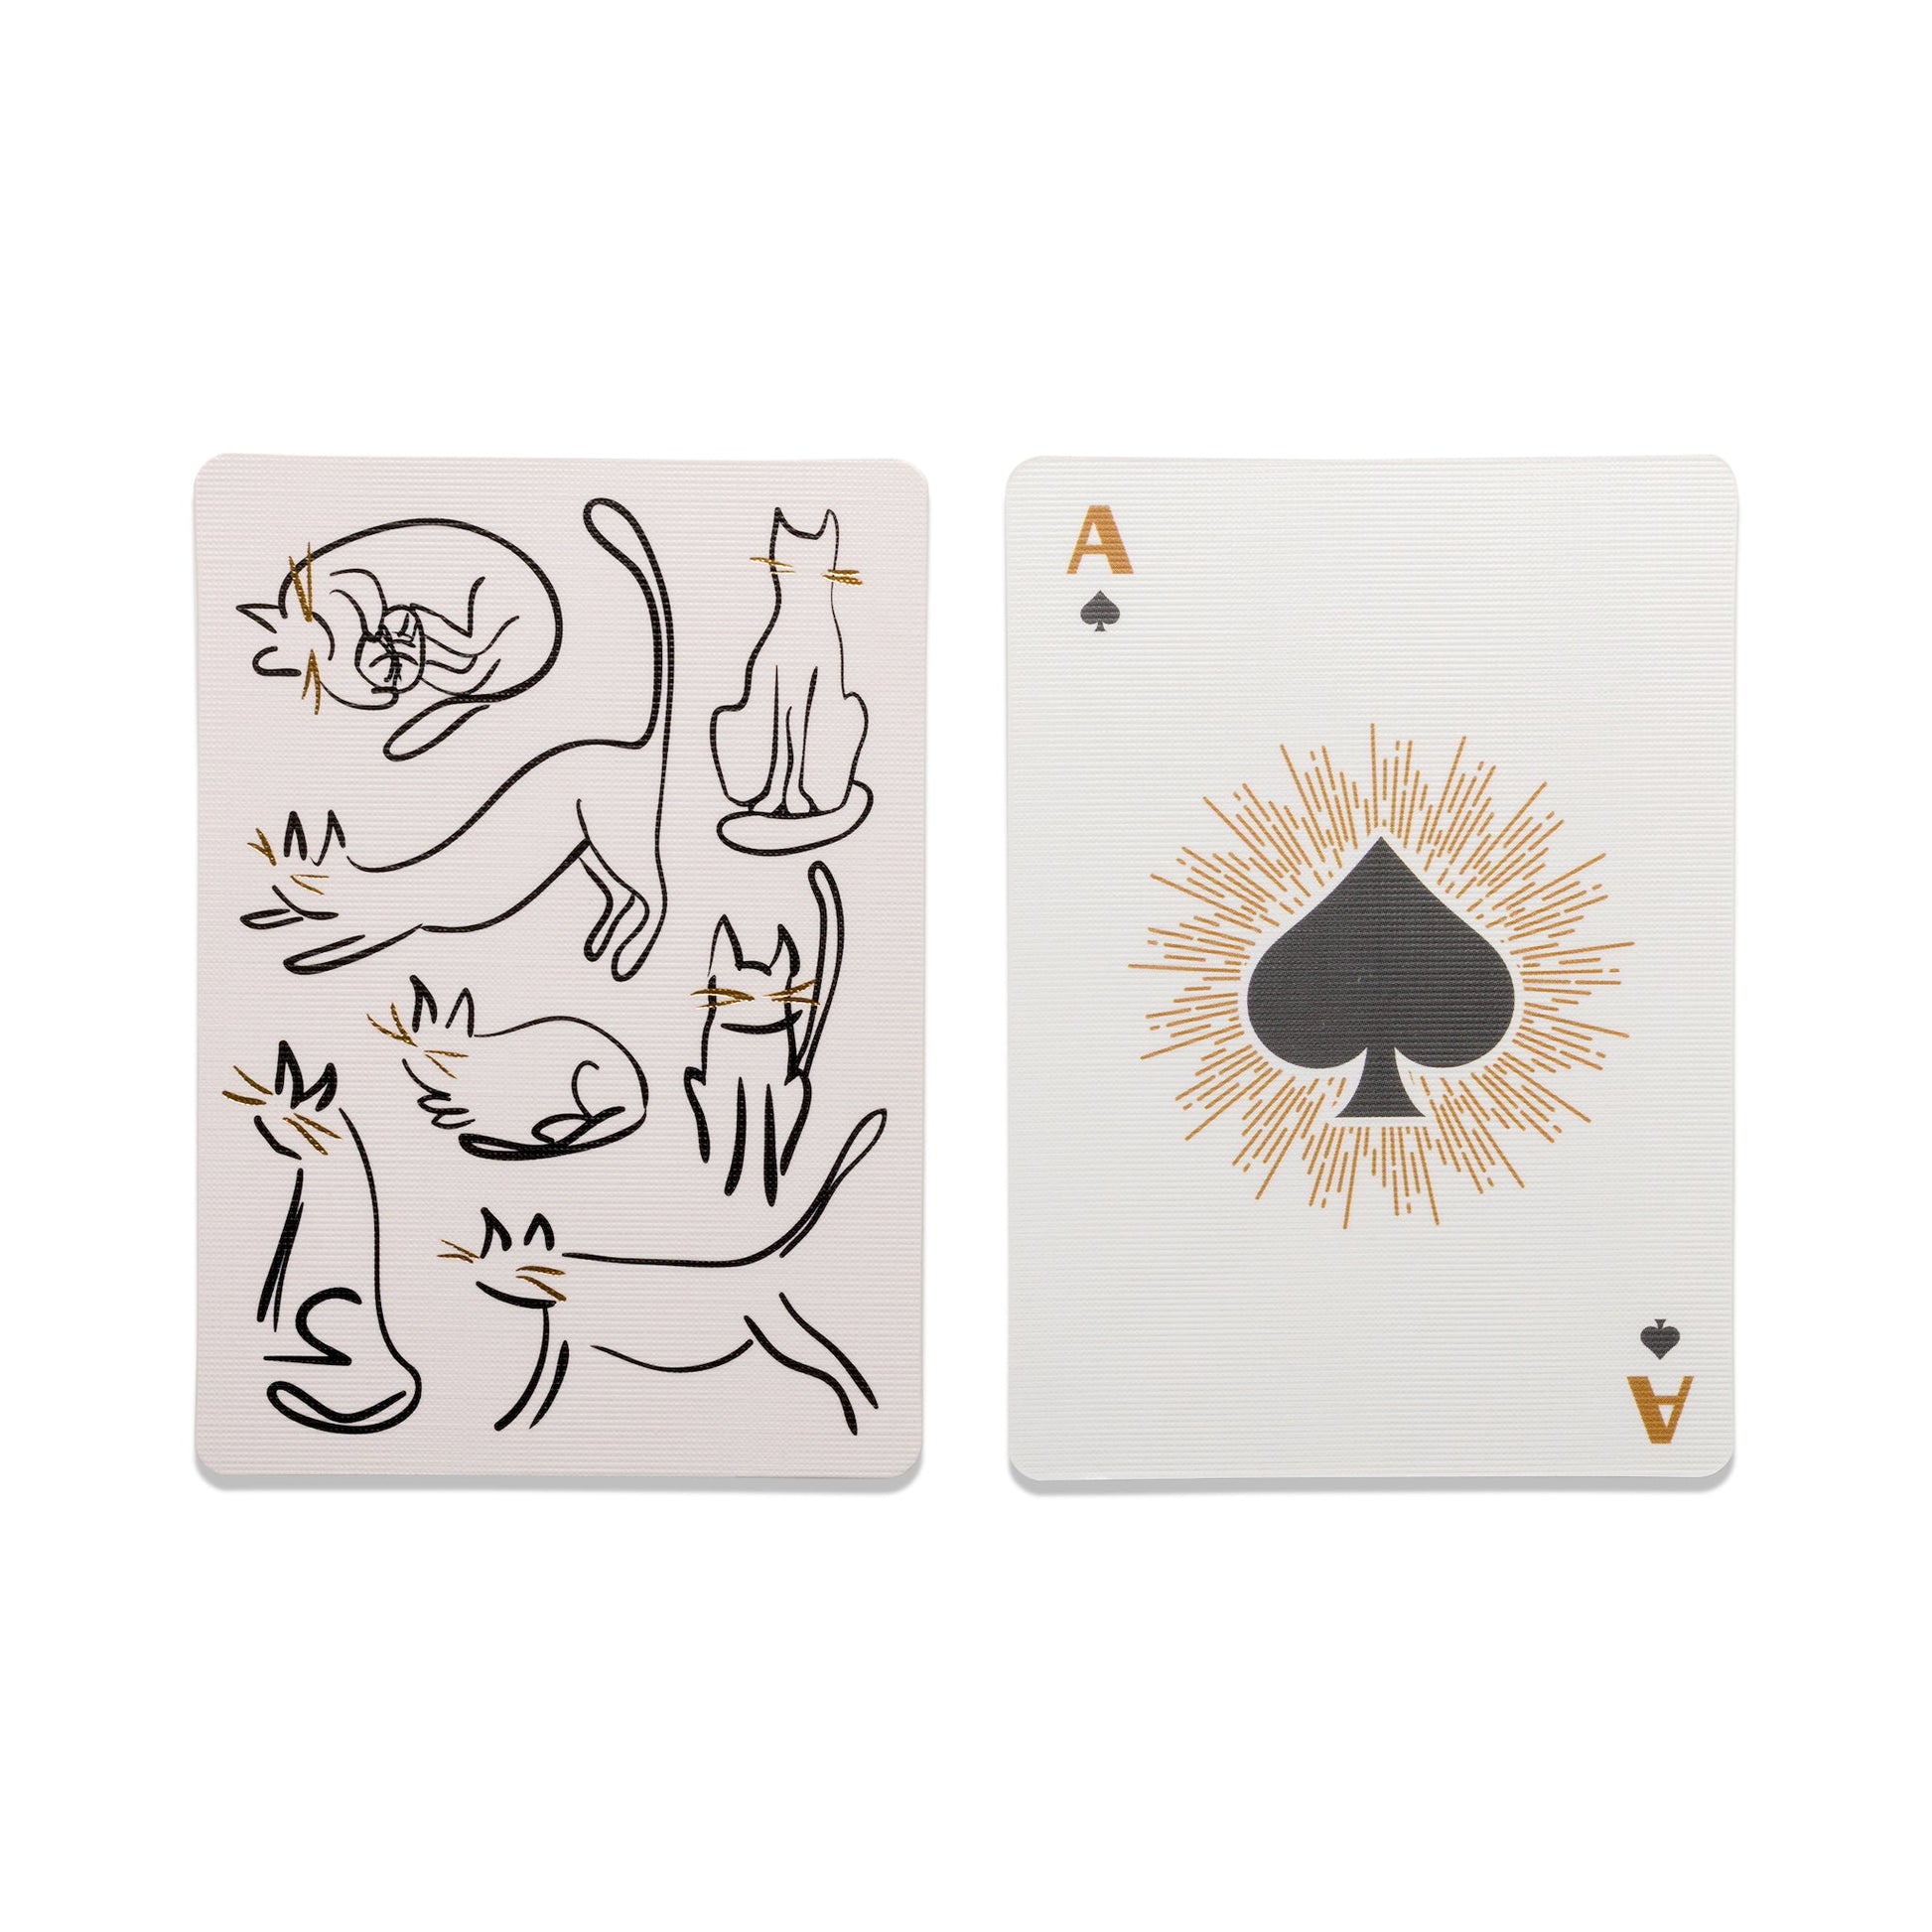 Playing Cards - Cats - one card face down and ace of spades face up